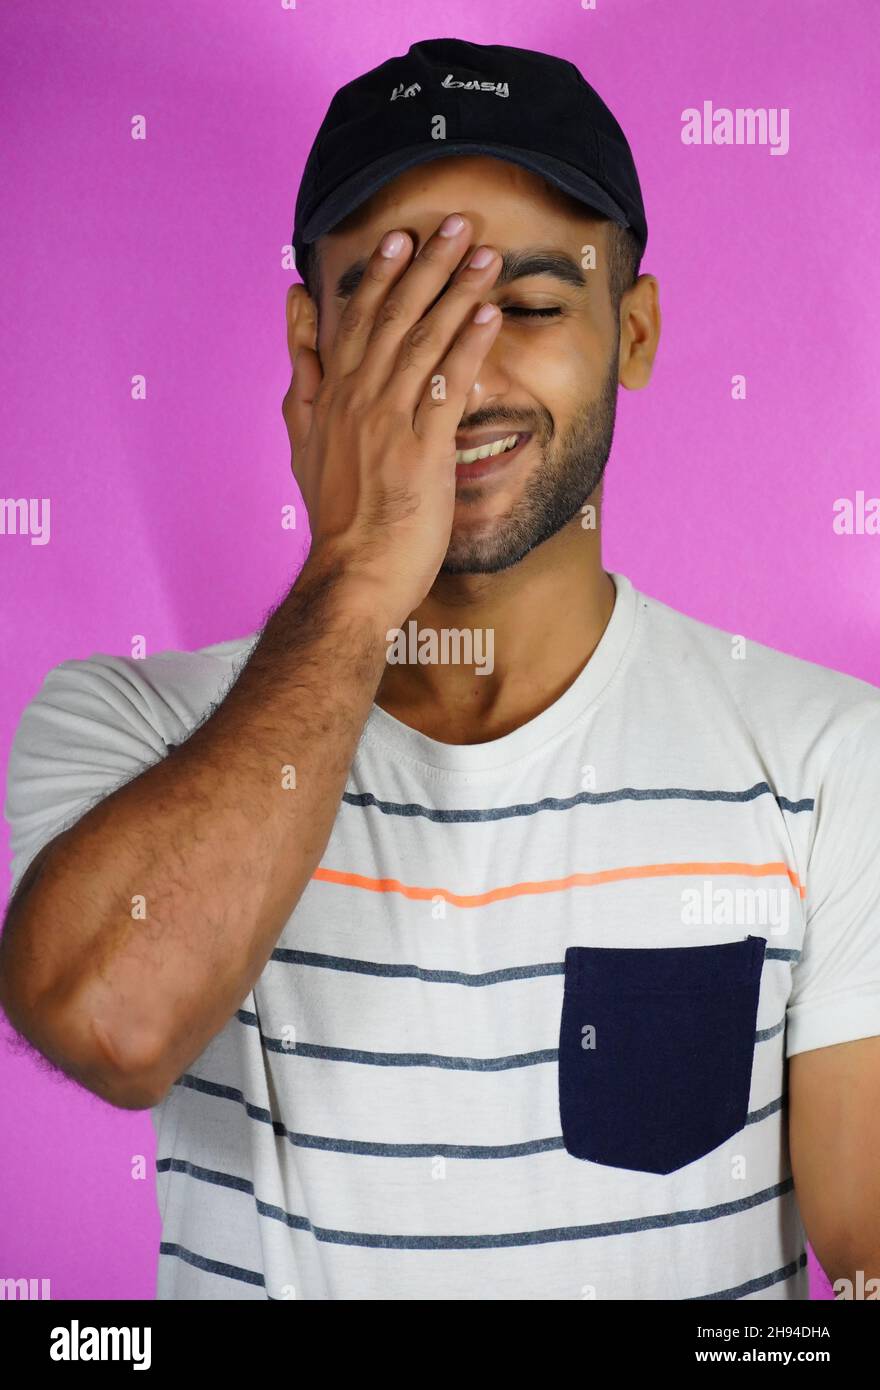 shy man image in pink background Stock Photo